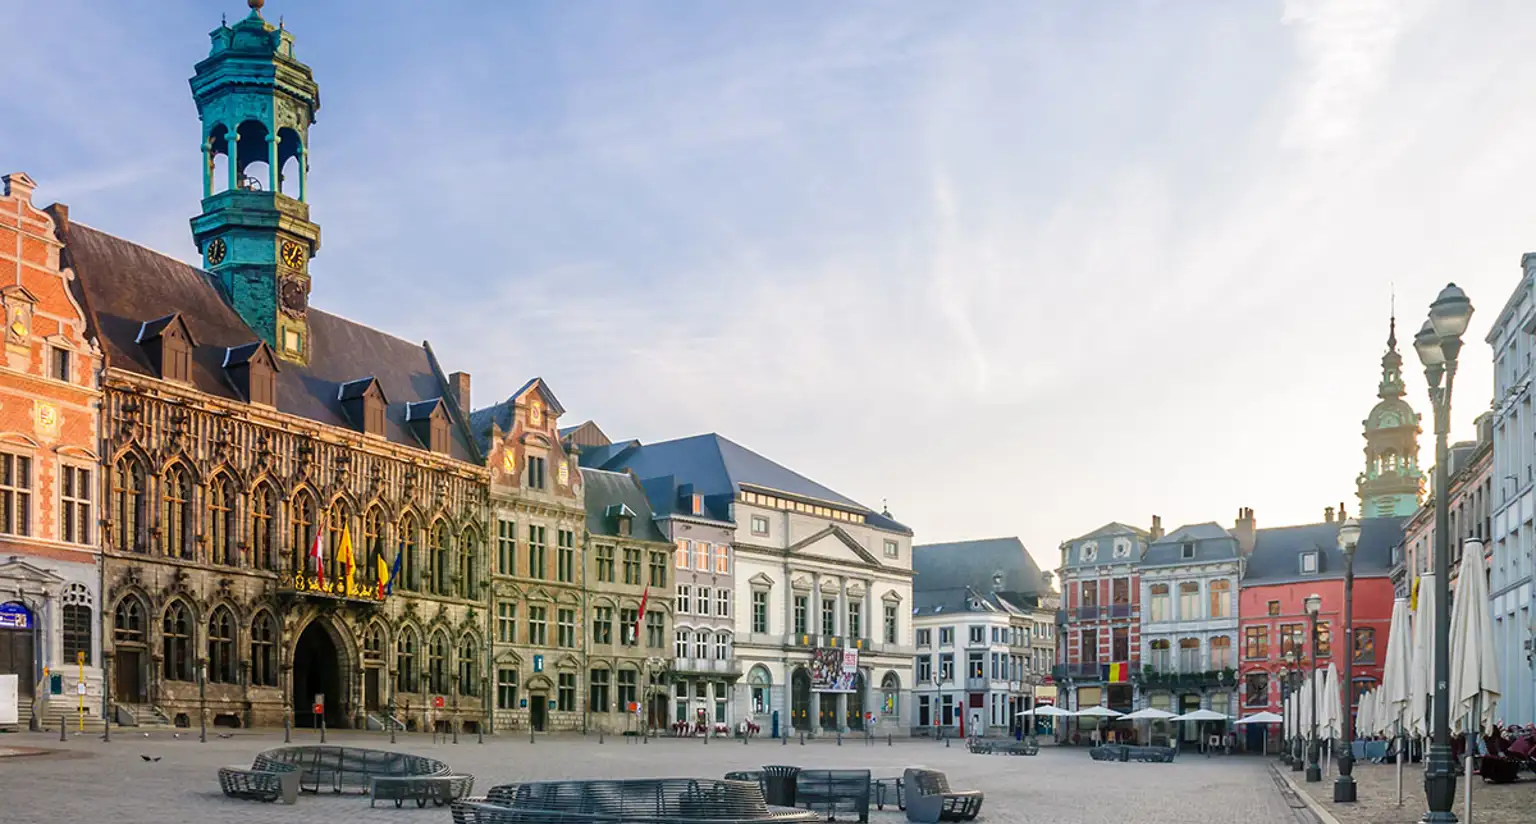 A city guide to Mons, Belgium